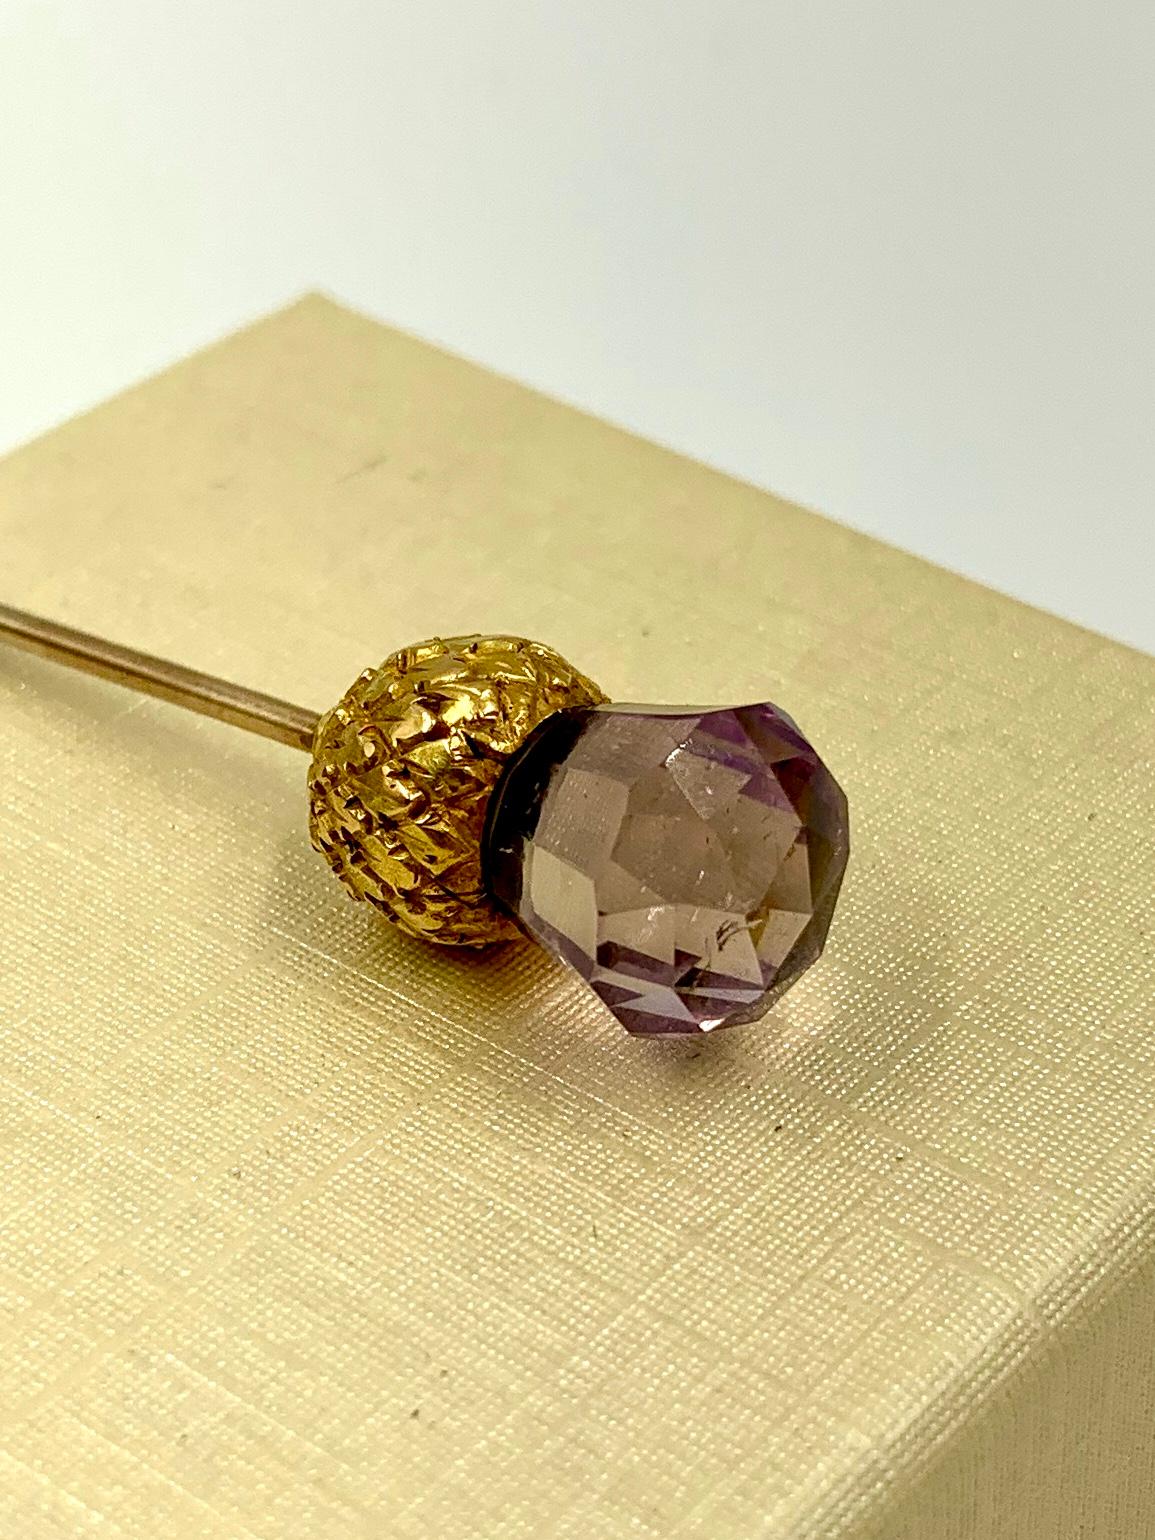 Naturalistically modelled faceted amethyst and 14K yellow gold thistle pin, Scottish, 19th century.
The Thistle flower is symbolic of graciousness and nobility in Celtic lore. It became the emblem of Scotland in the thirteenth century and is the